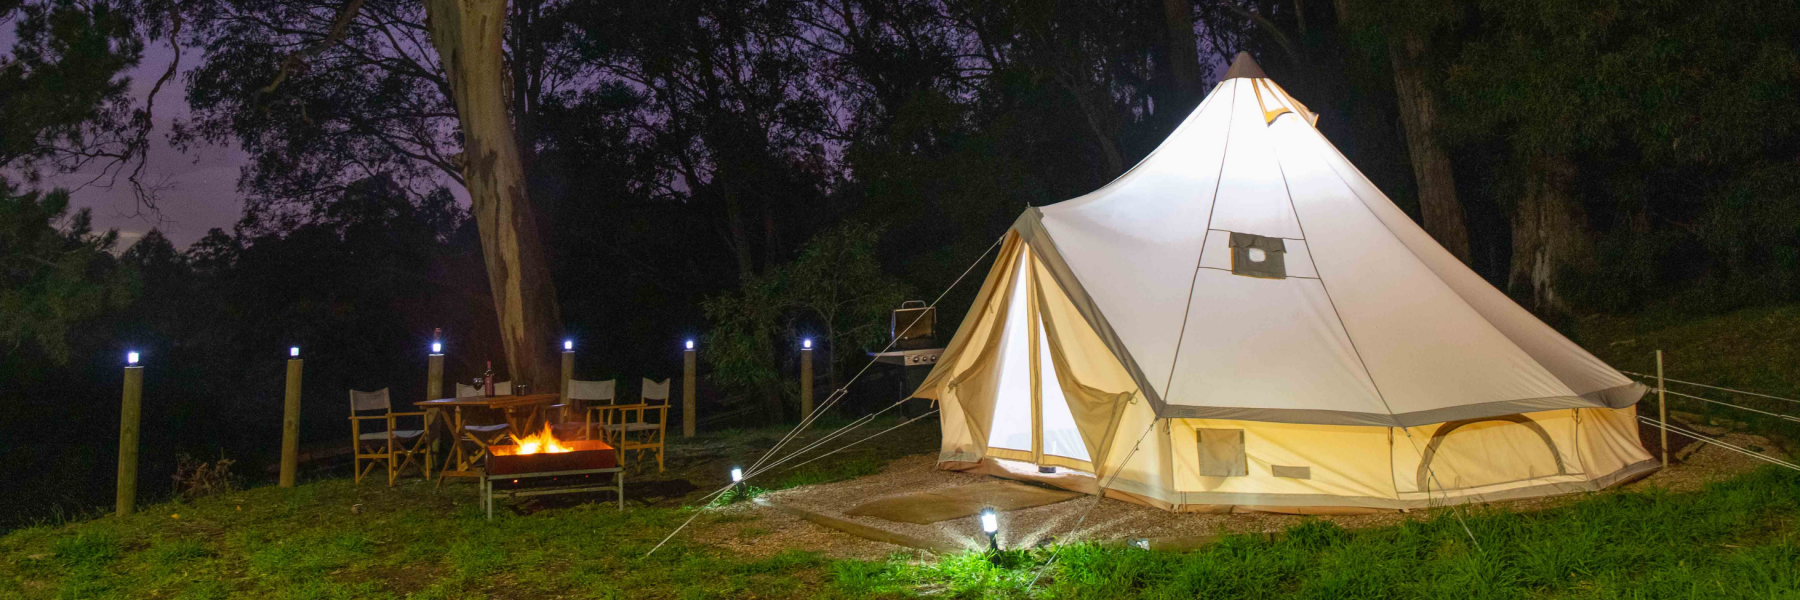 Glamping Website Header with Campfire